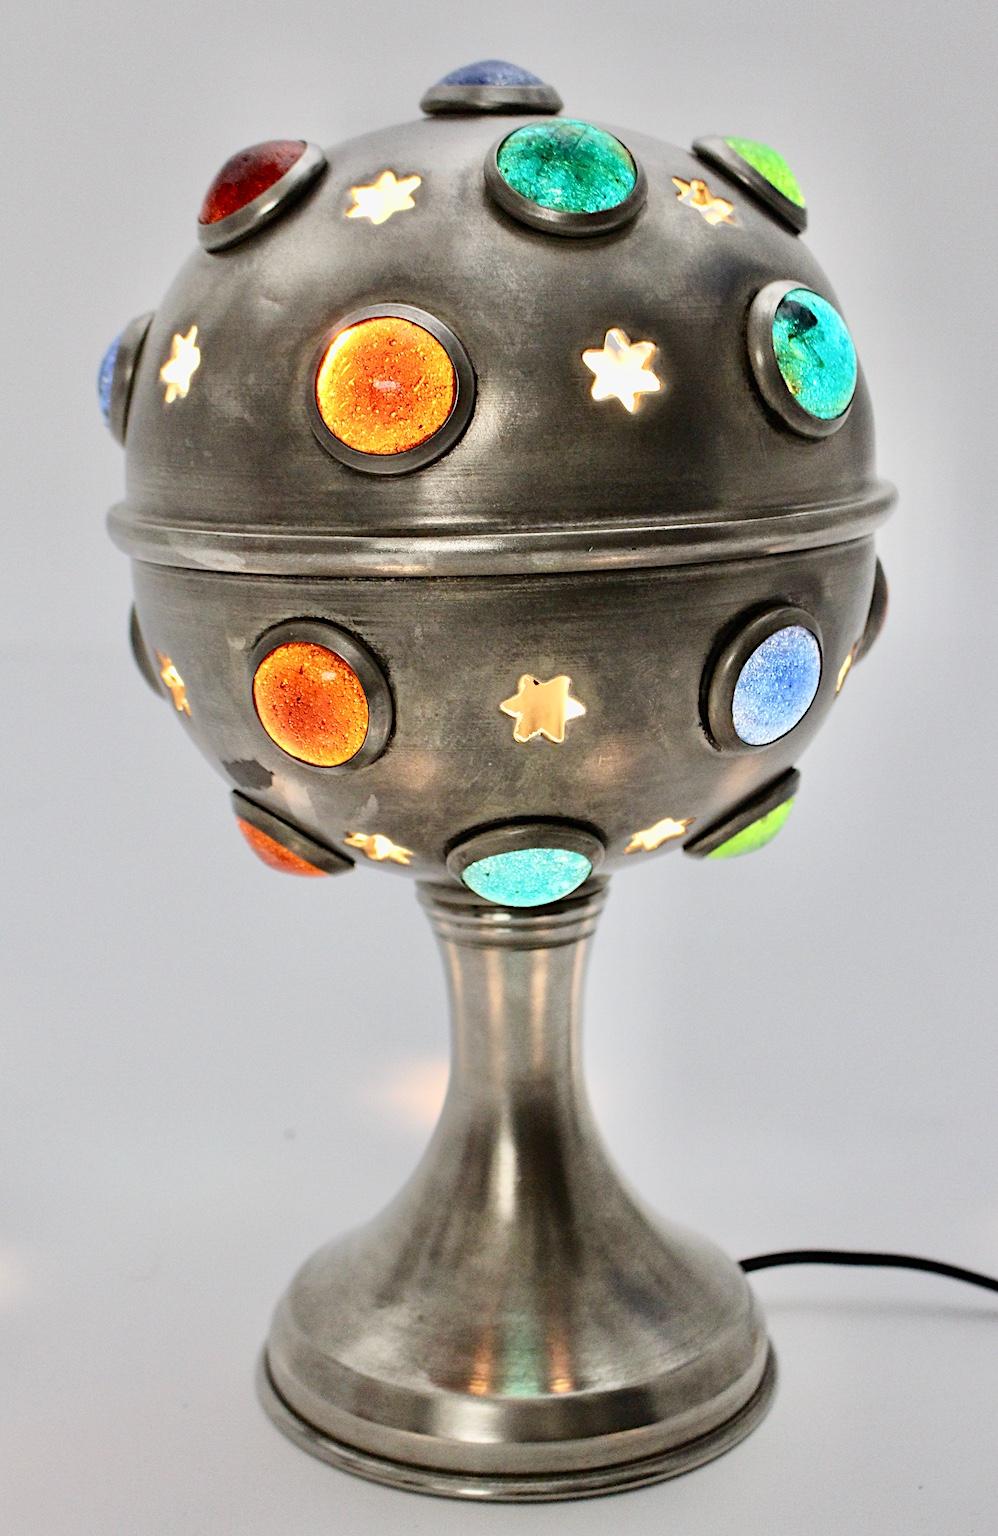 This great Mid-Century Modern vintage Sputnik table lamp was made of nickel-plated brass with 21 multicolored glass eyes (blue, green, light green and orange) and perforated stars.
The blaze through the multicolored glass eyes and the perforated